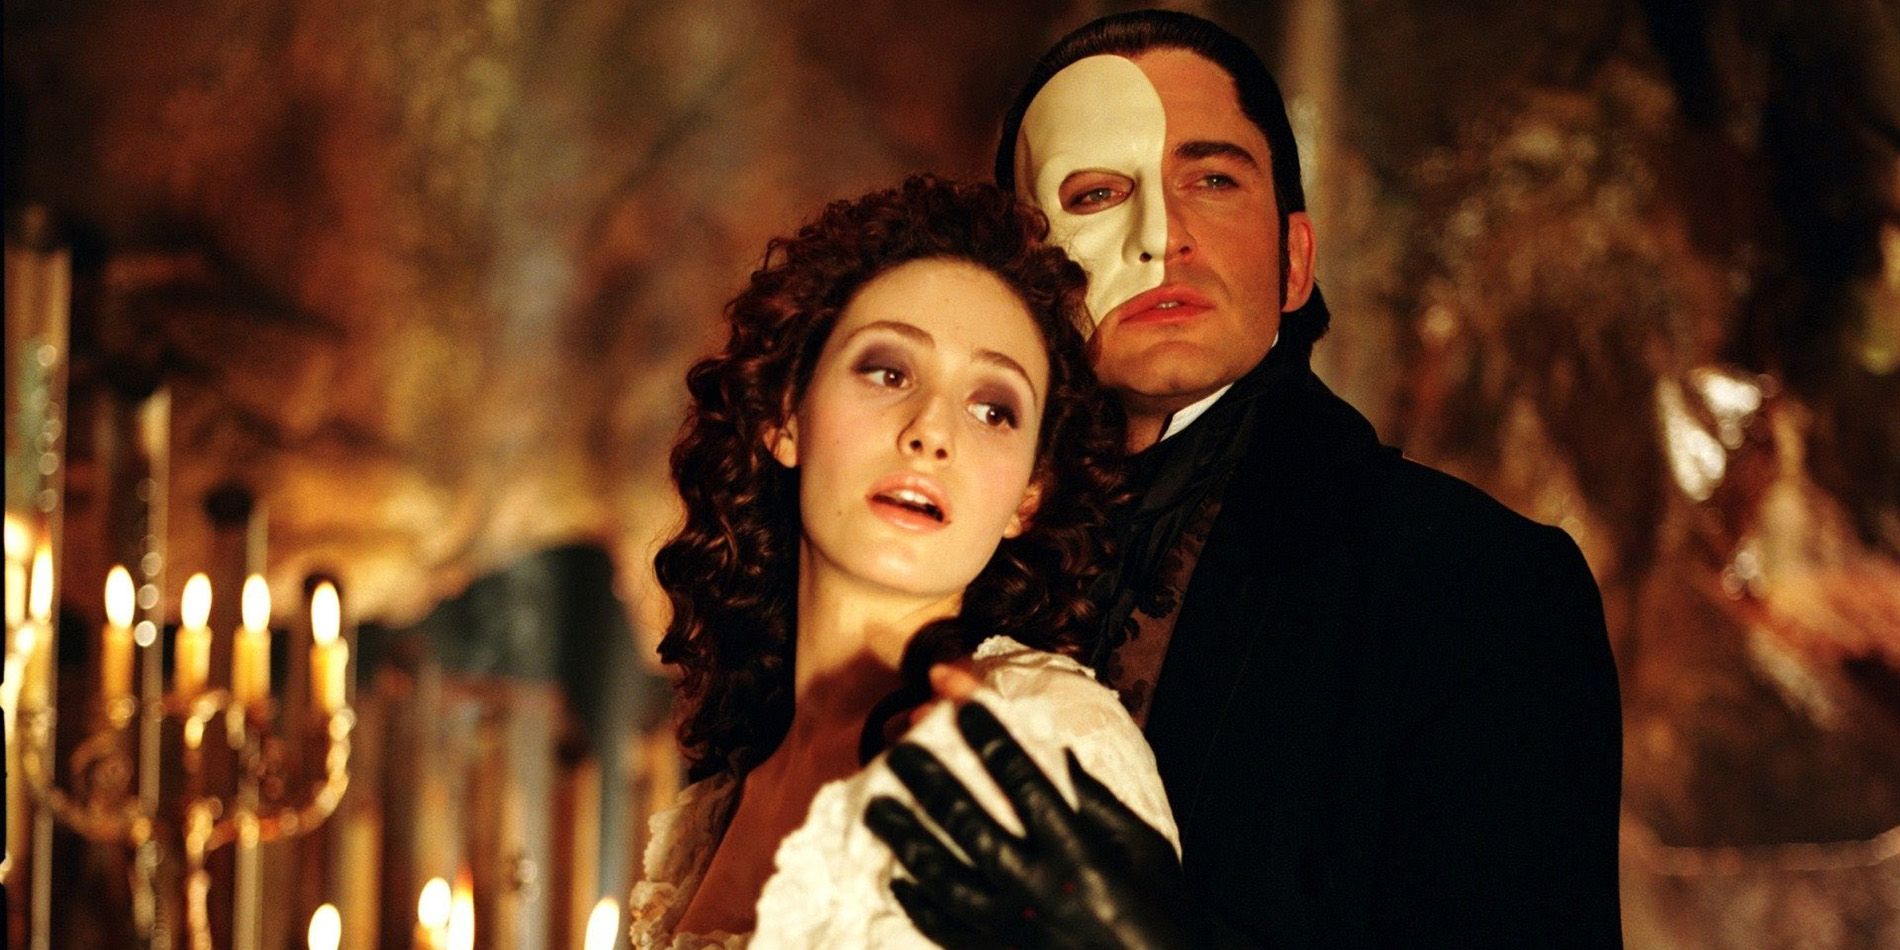 Emmy Rossum being held by Gerard Butler in 2004's The Phantom of the Opera